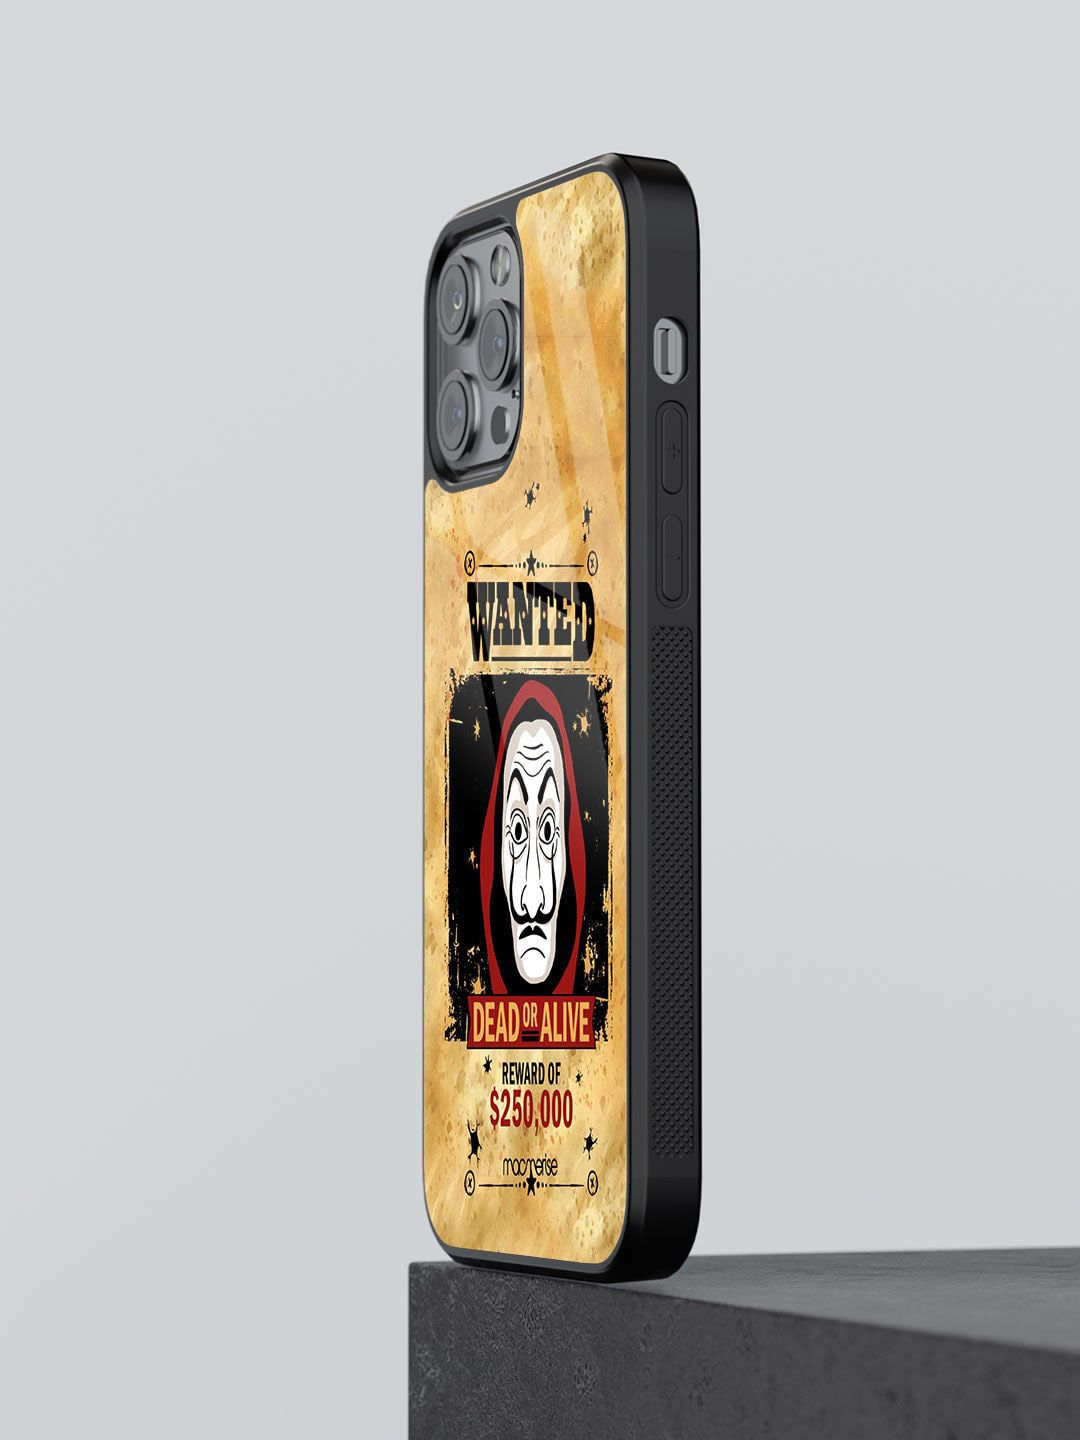 macmerise Yellow Printed Iphone 13 Pro Glass Phone Case Price in India